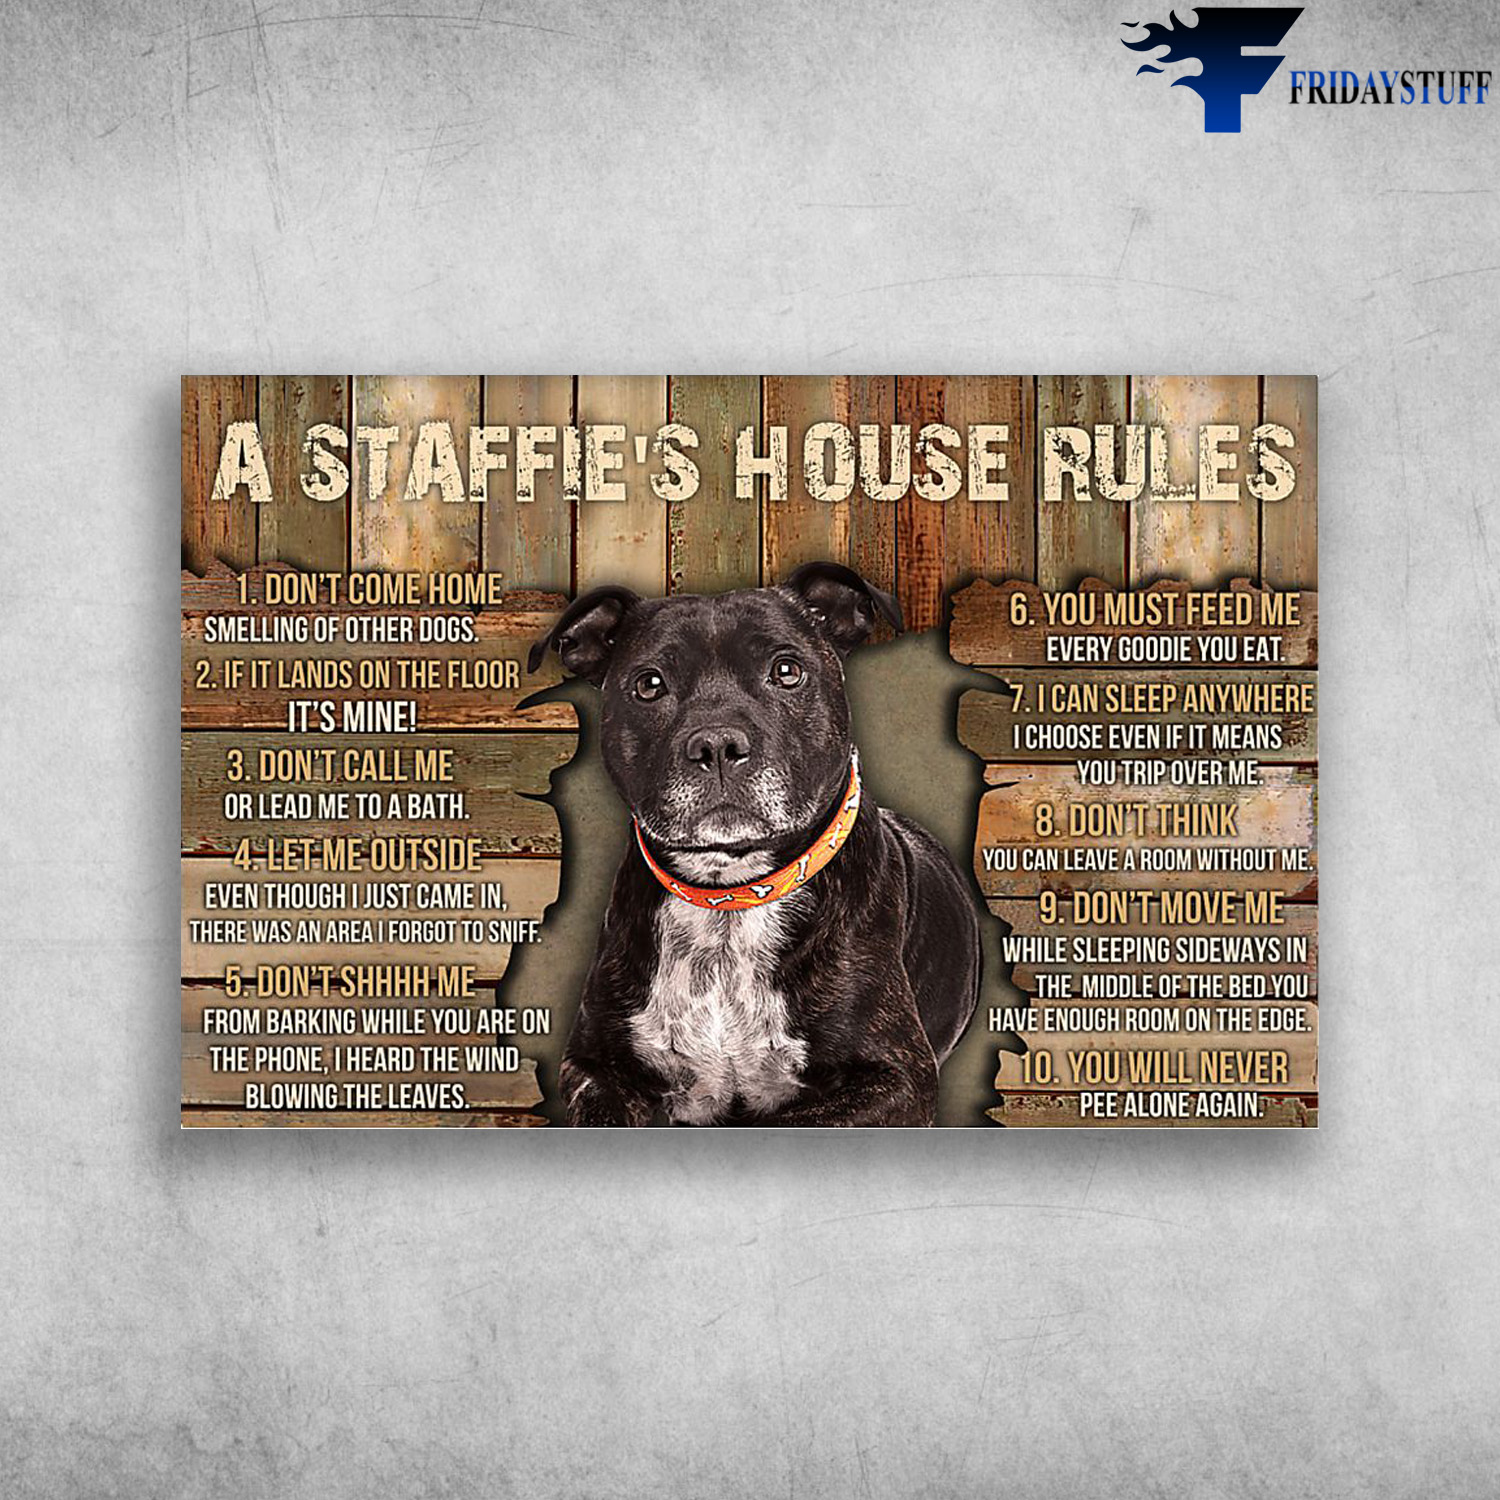 Staffordshire Bull Terrier - A Staffie's House Rules